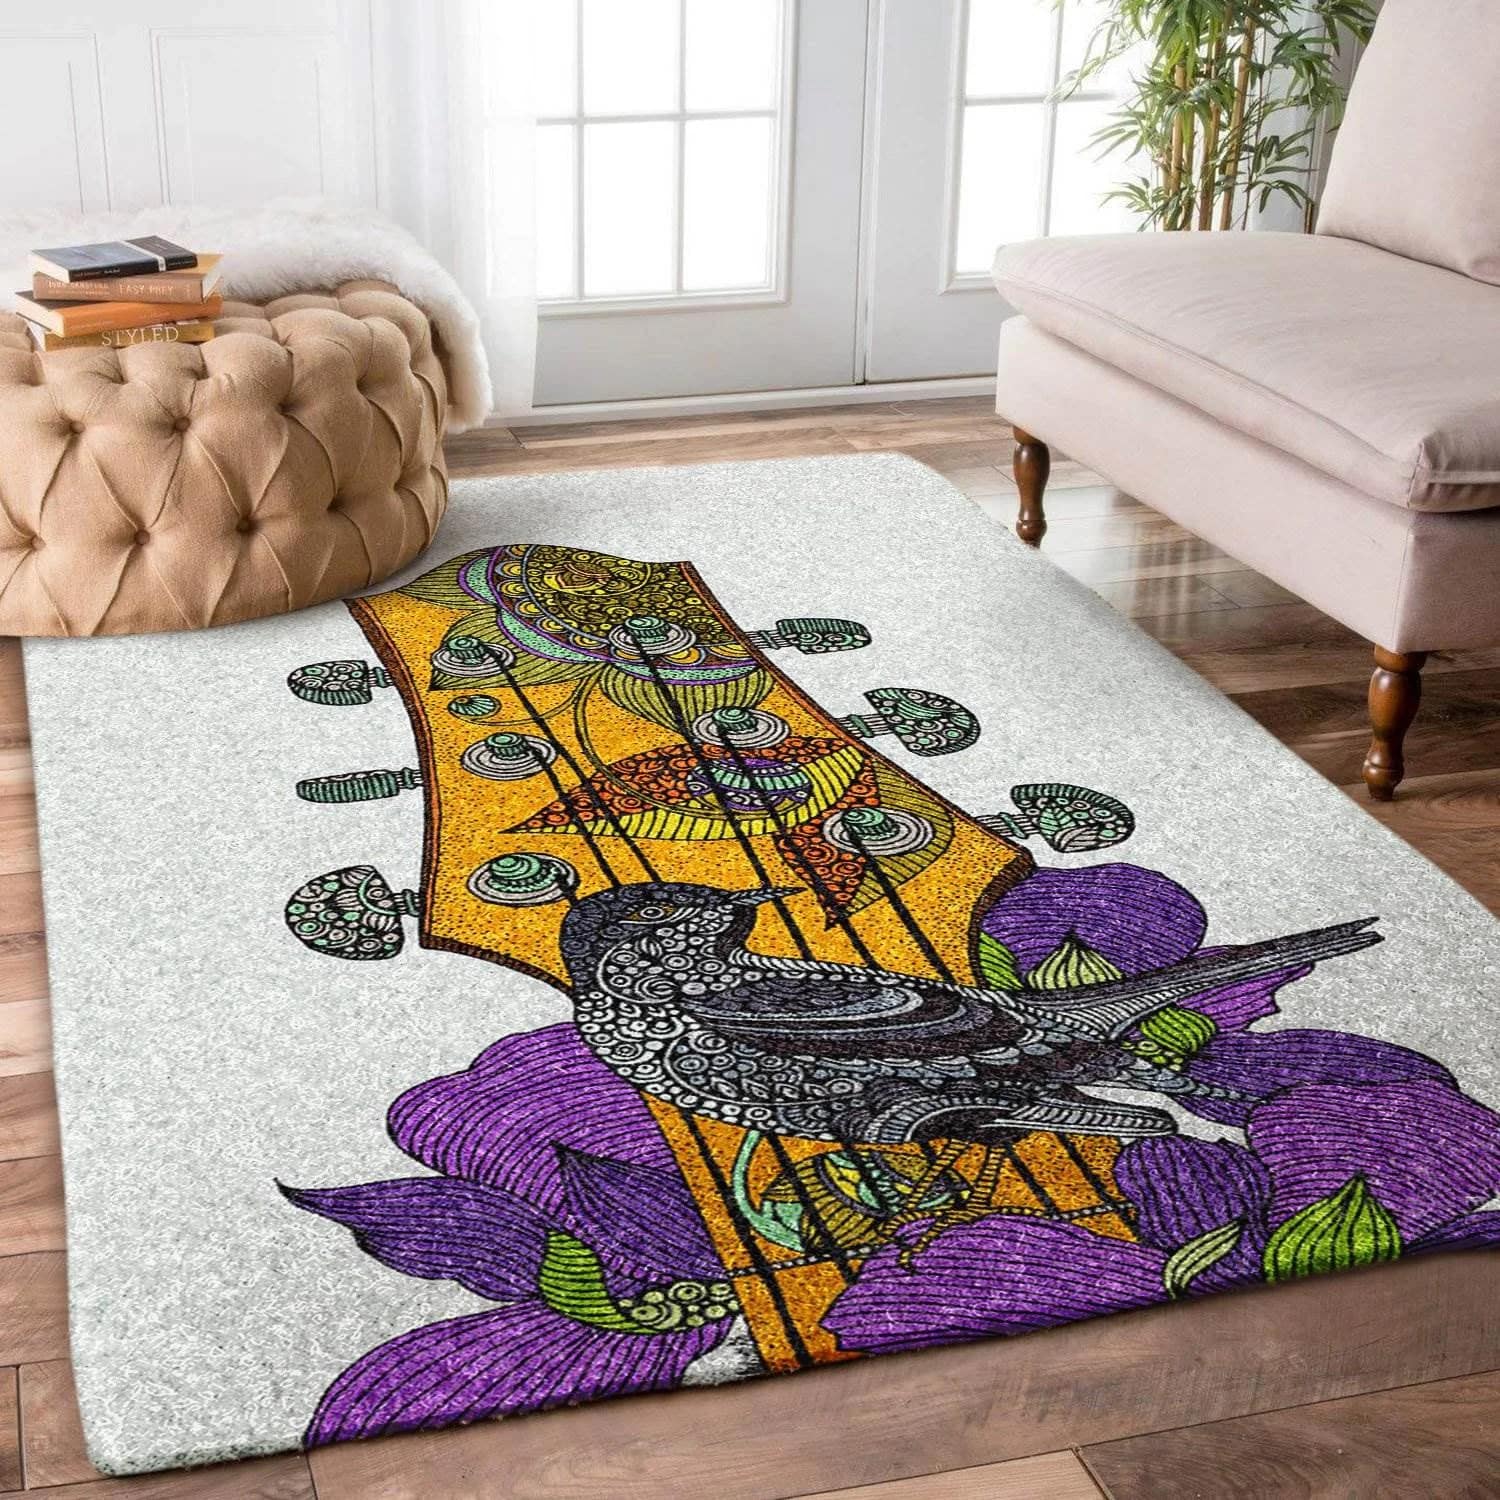 Bird And Guitar Limited Edition Amazon Best Seller Sku 267246 Rug